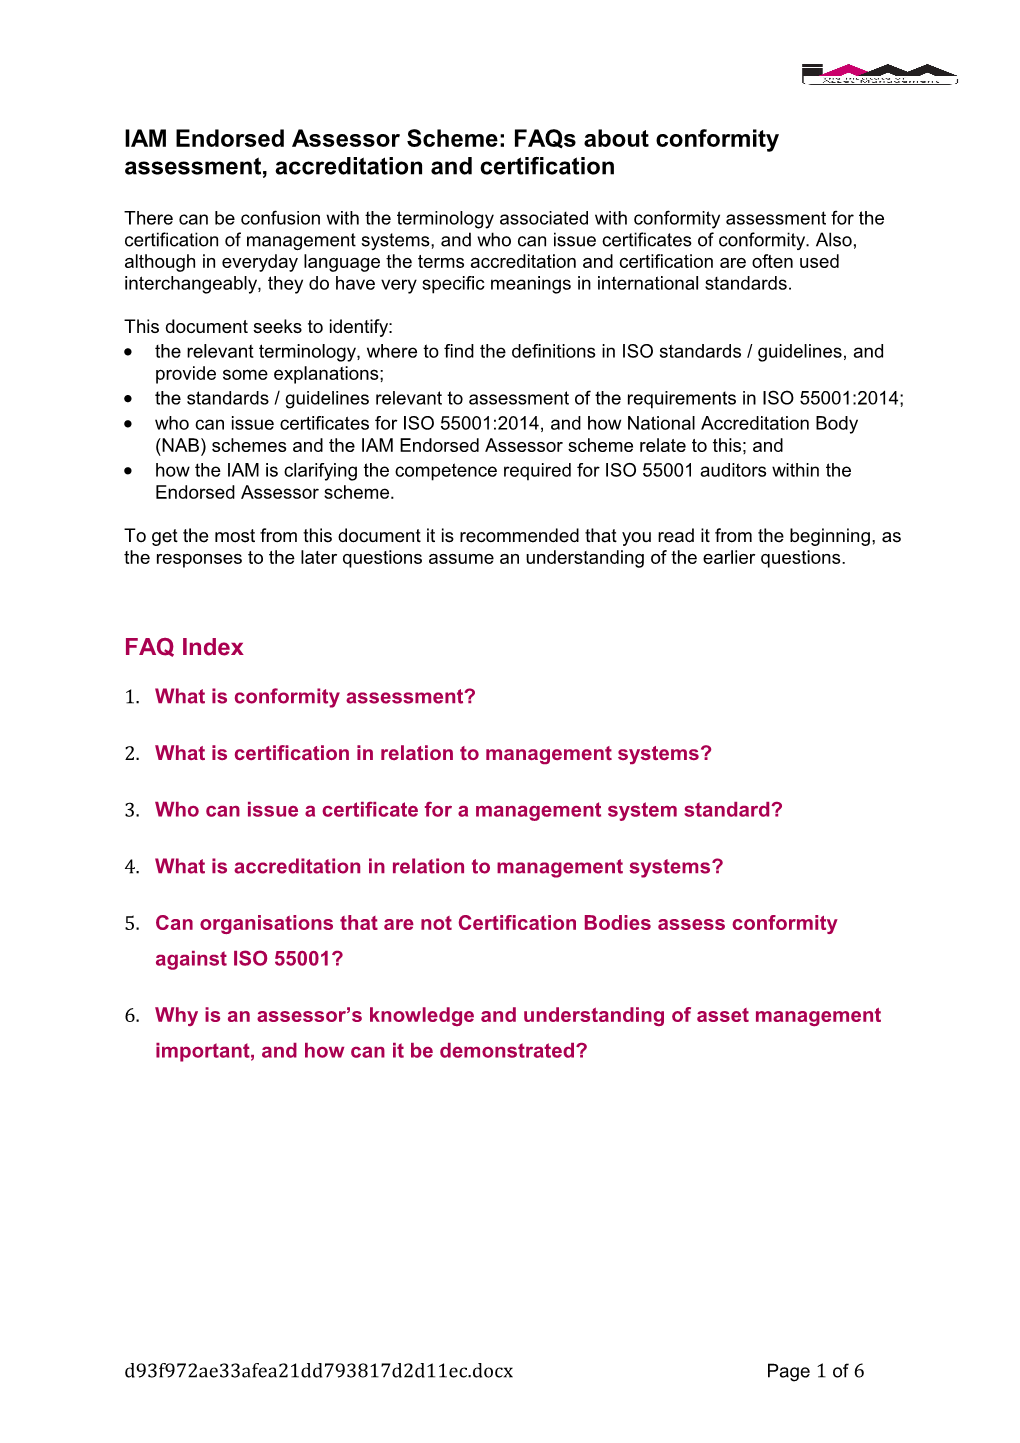 IAM Endorsed Assessor Scheme: Faqs About Conformity Assessment, Accreditation and Certification